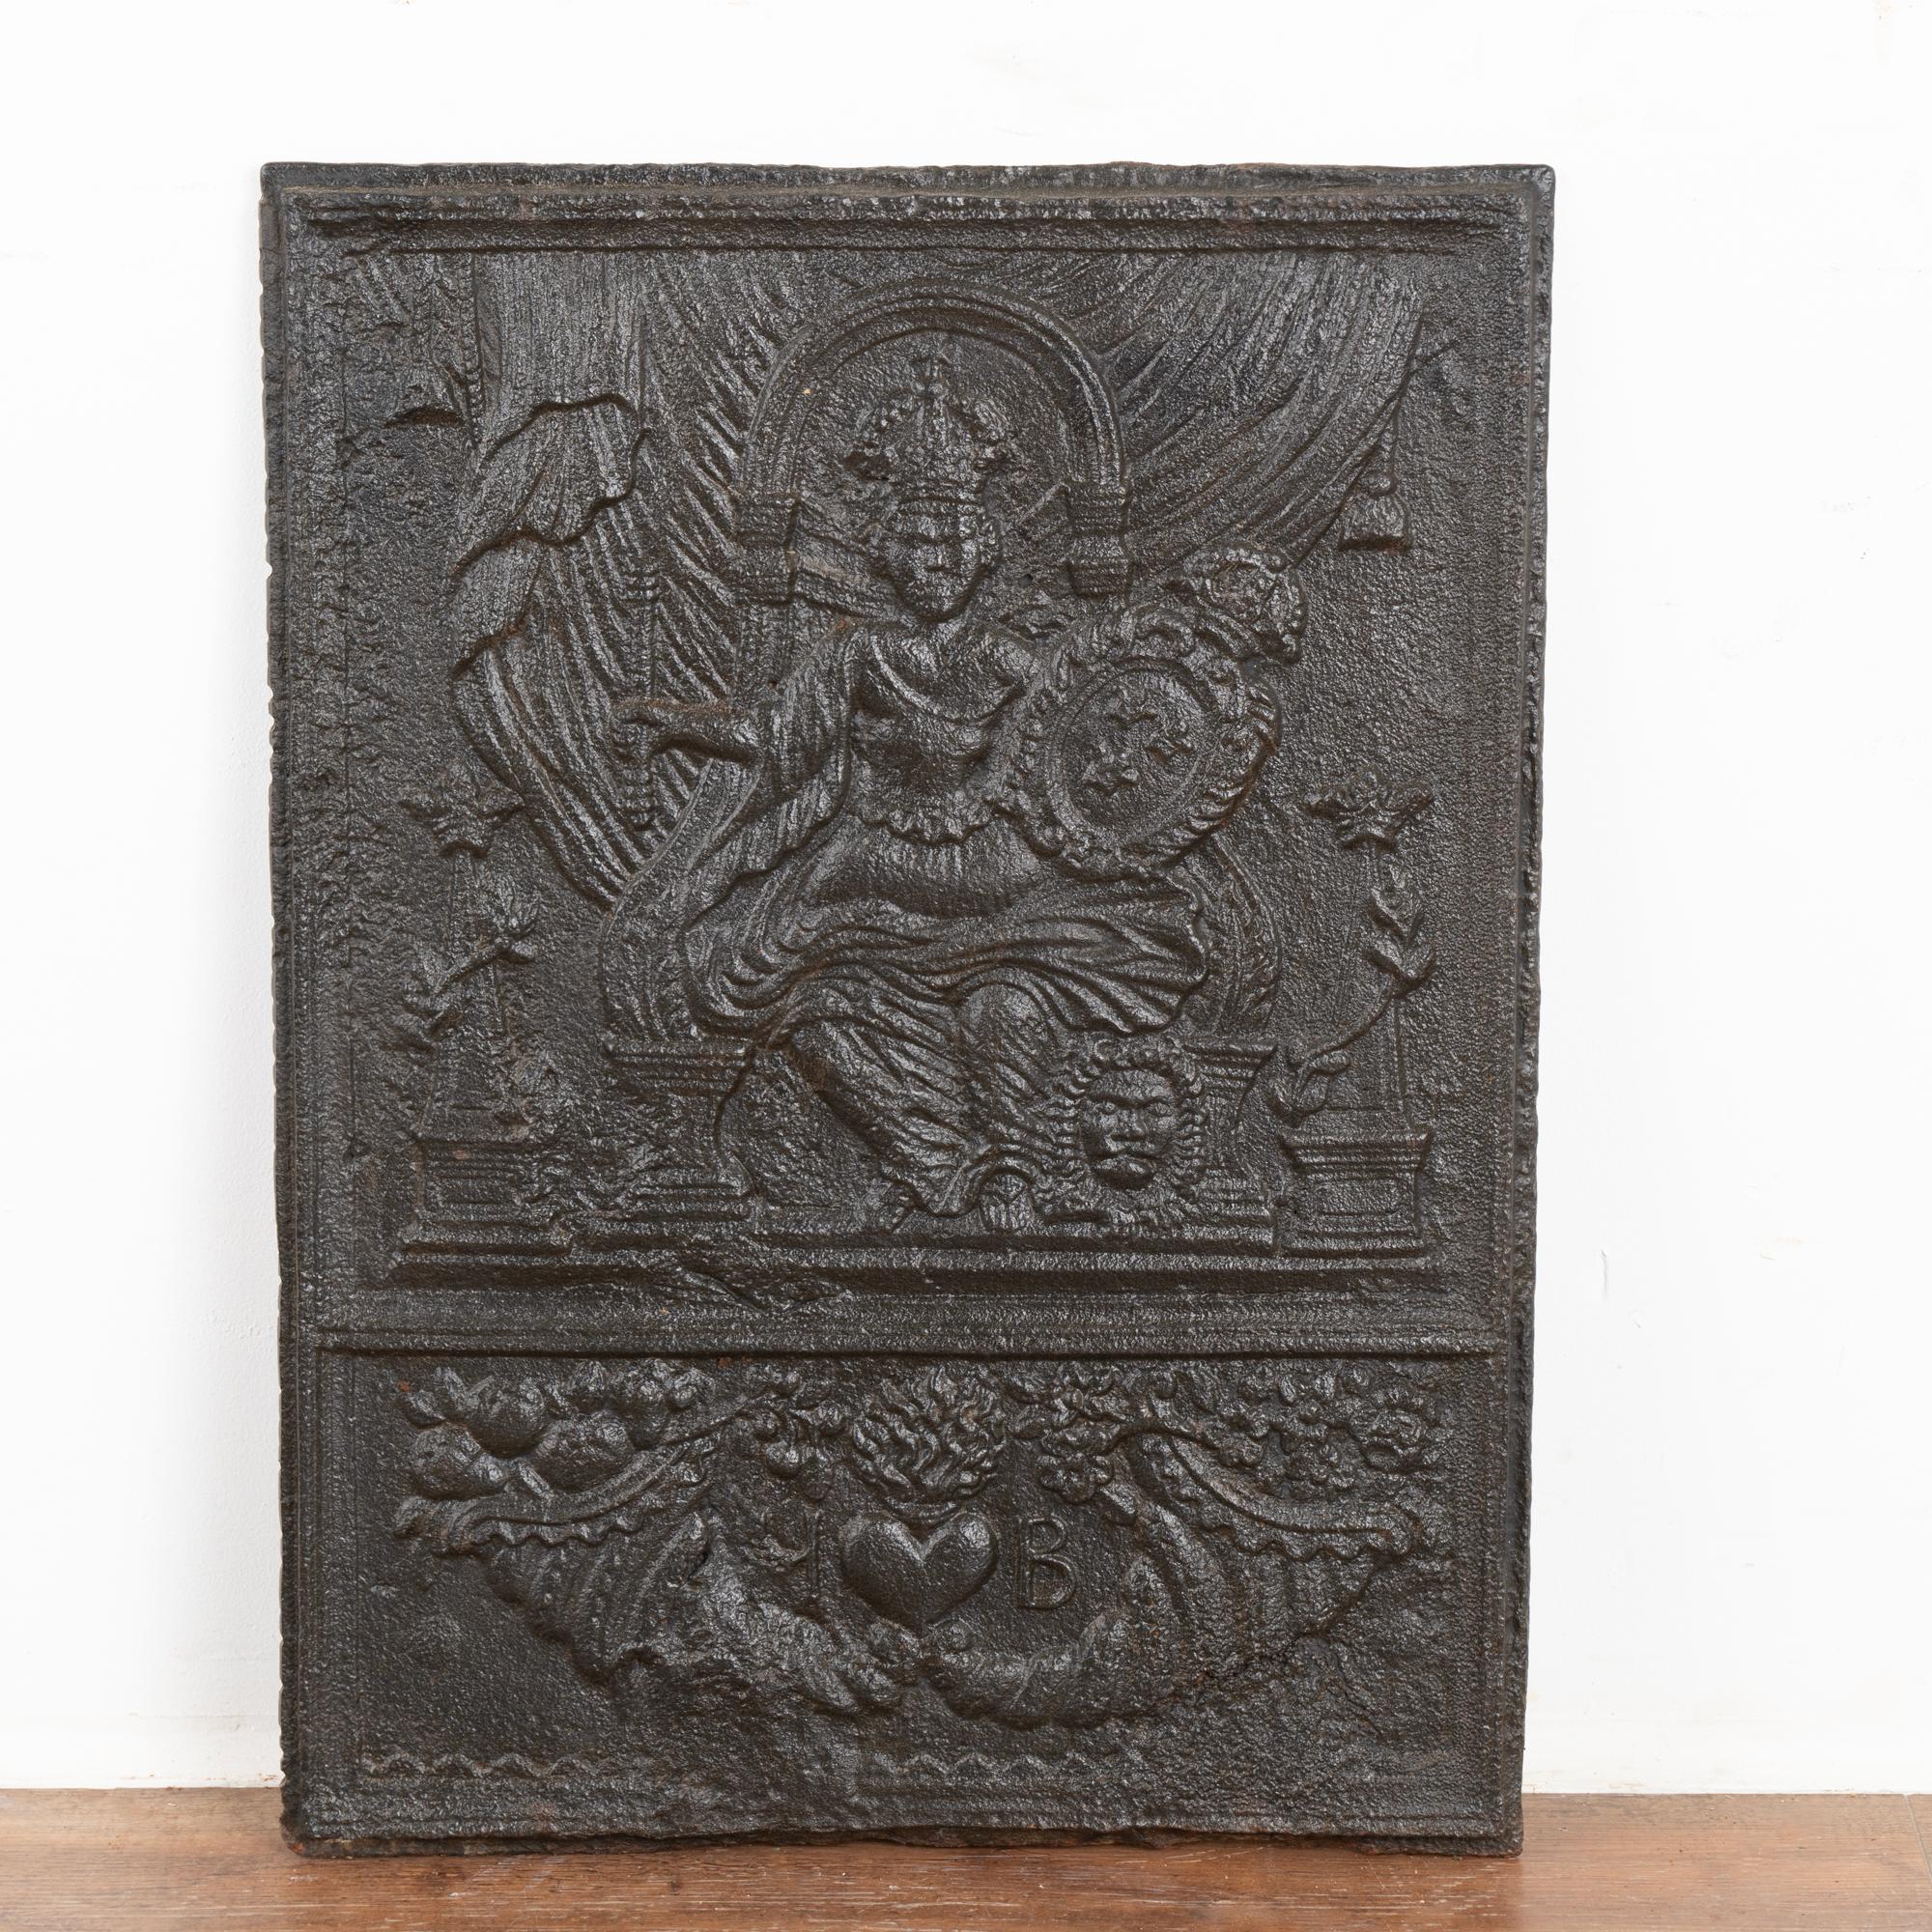 Cast iron fire back with a seated and crowned queen holding a scepter in upper section; in lower section a cornucopia with I B and a heart between the two letters. 
Any scratches, dings, or abrasions are reflective of age and do not detract from